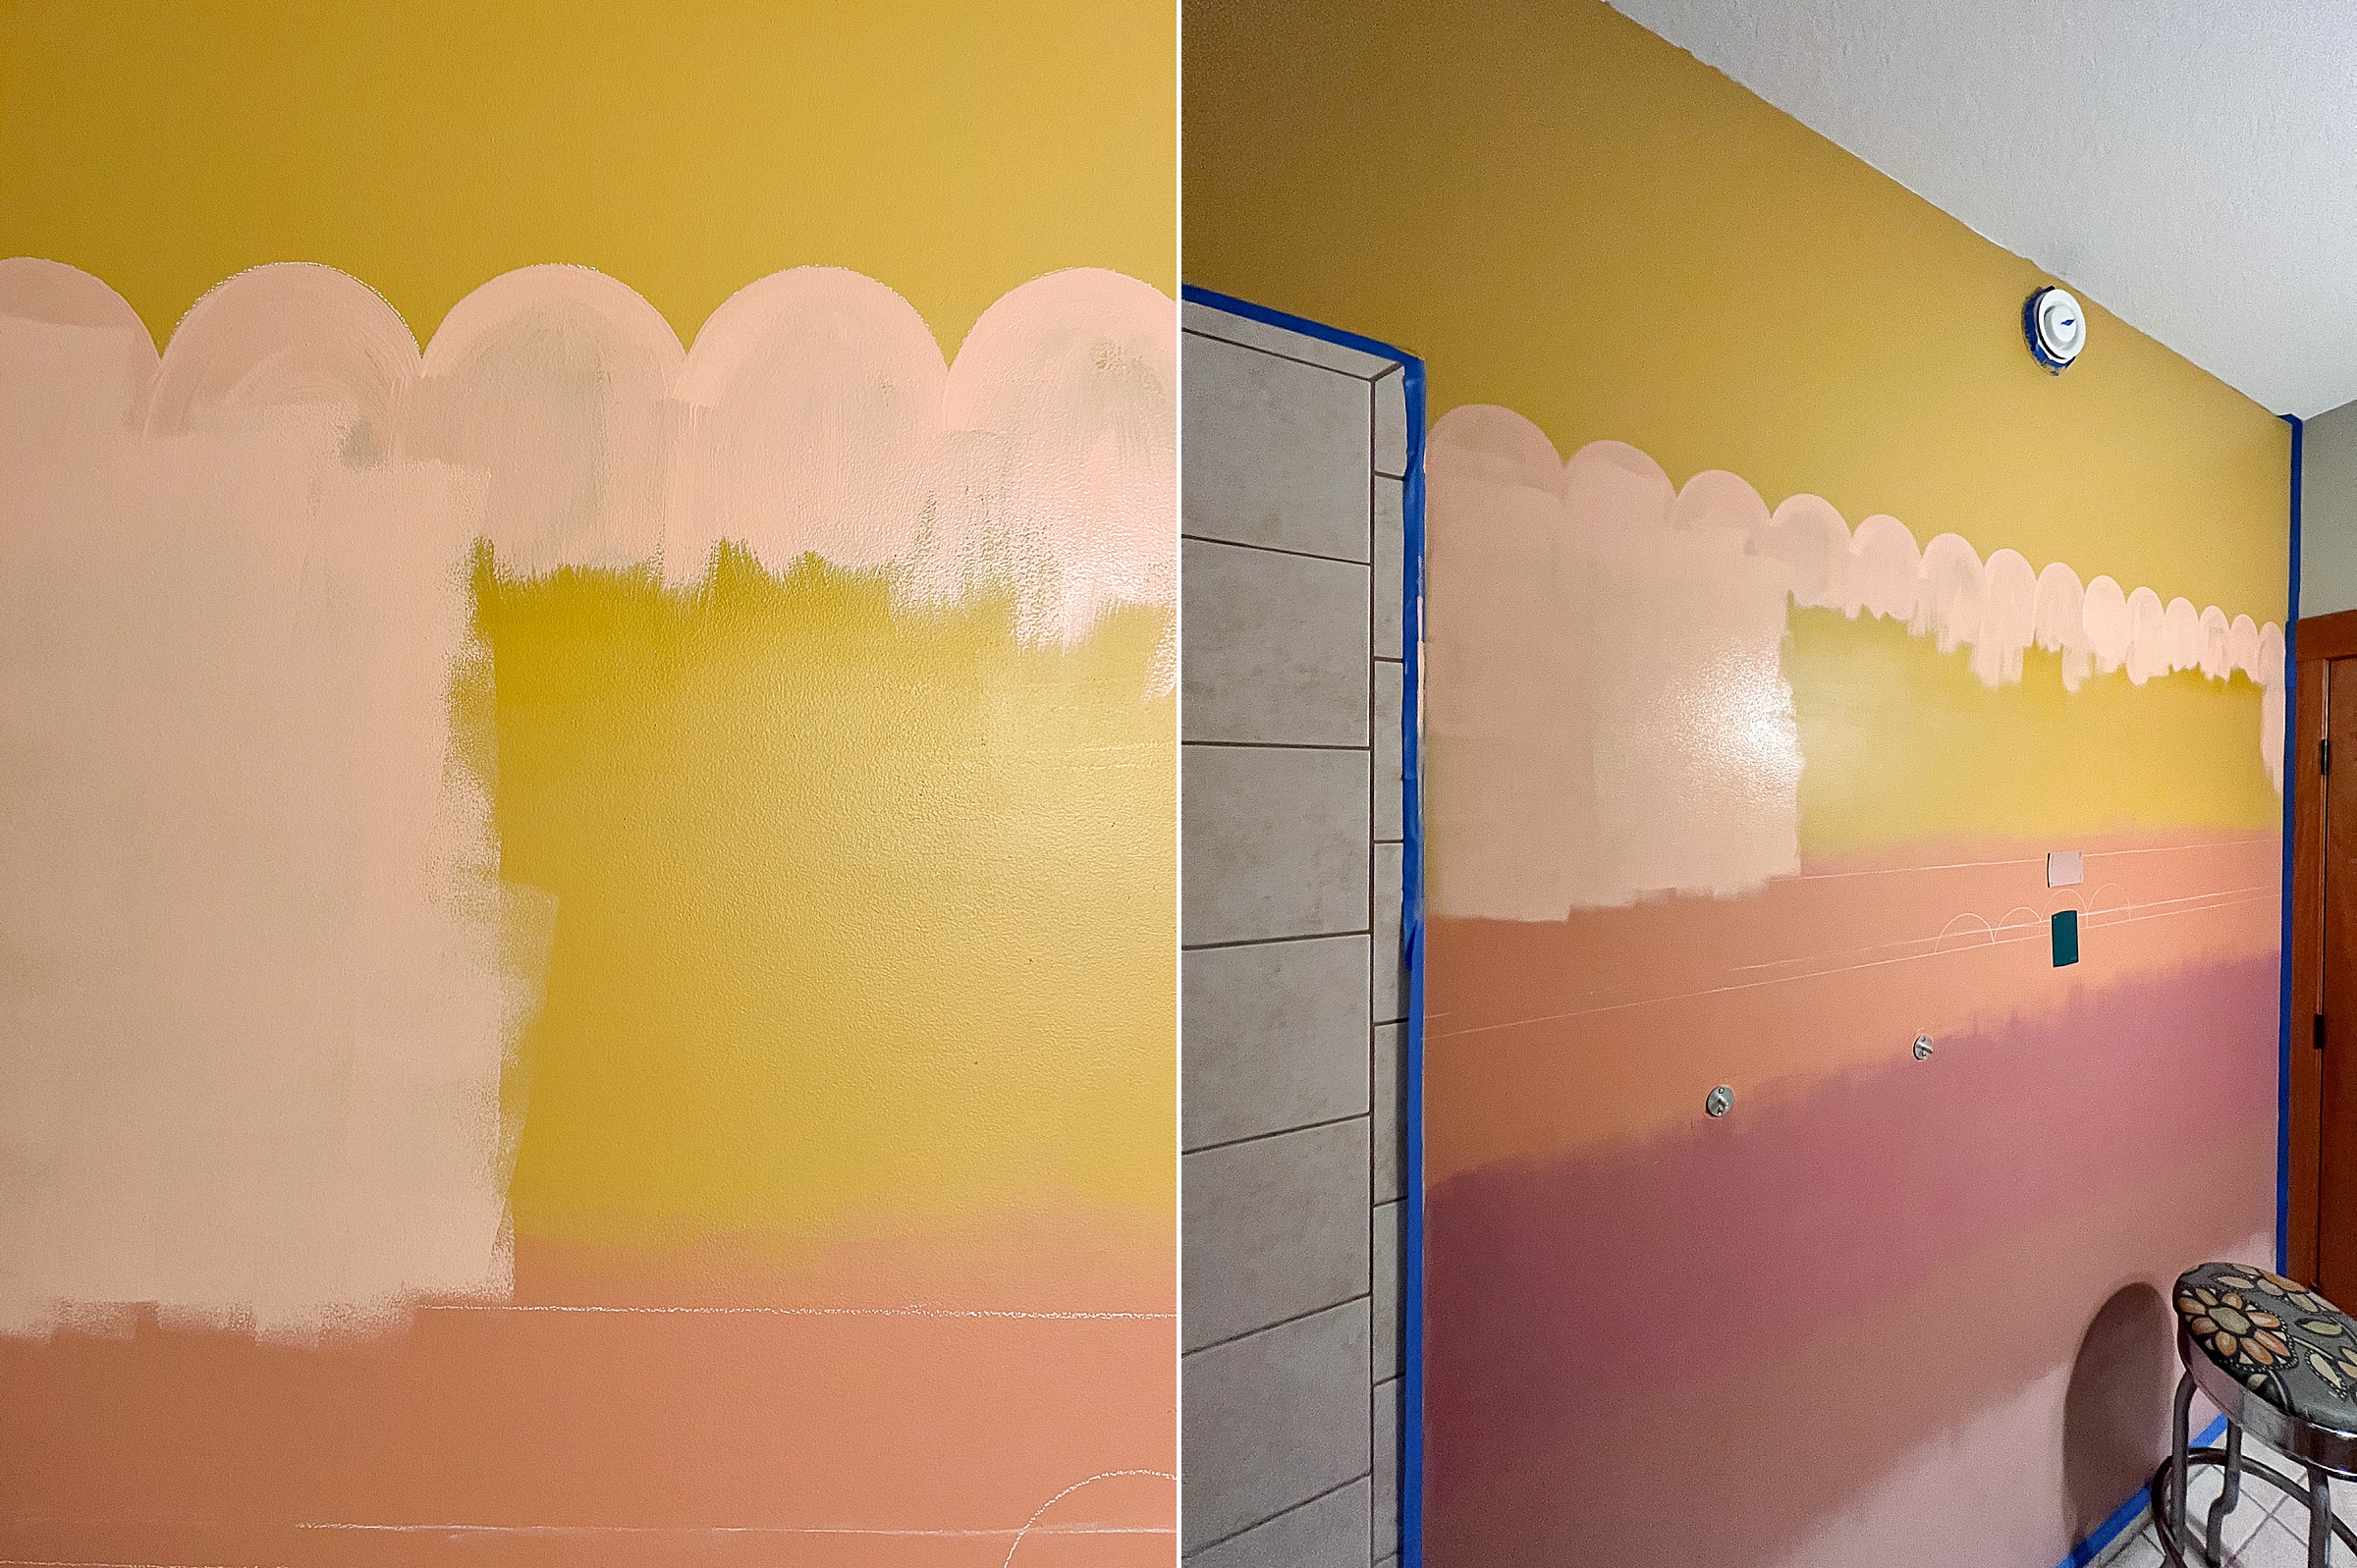 Scalloped wall painting DIY, how to paint easy scallops on the walls, how to paint scallops, bathroom mural ideas, how to paint a bathroom mural